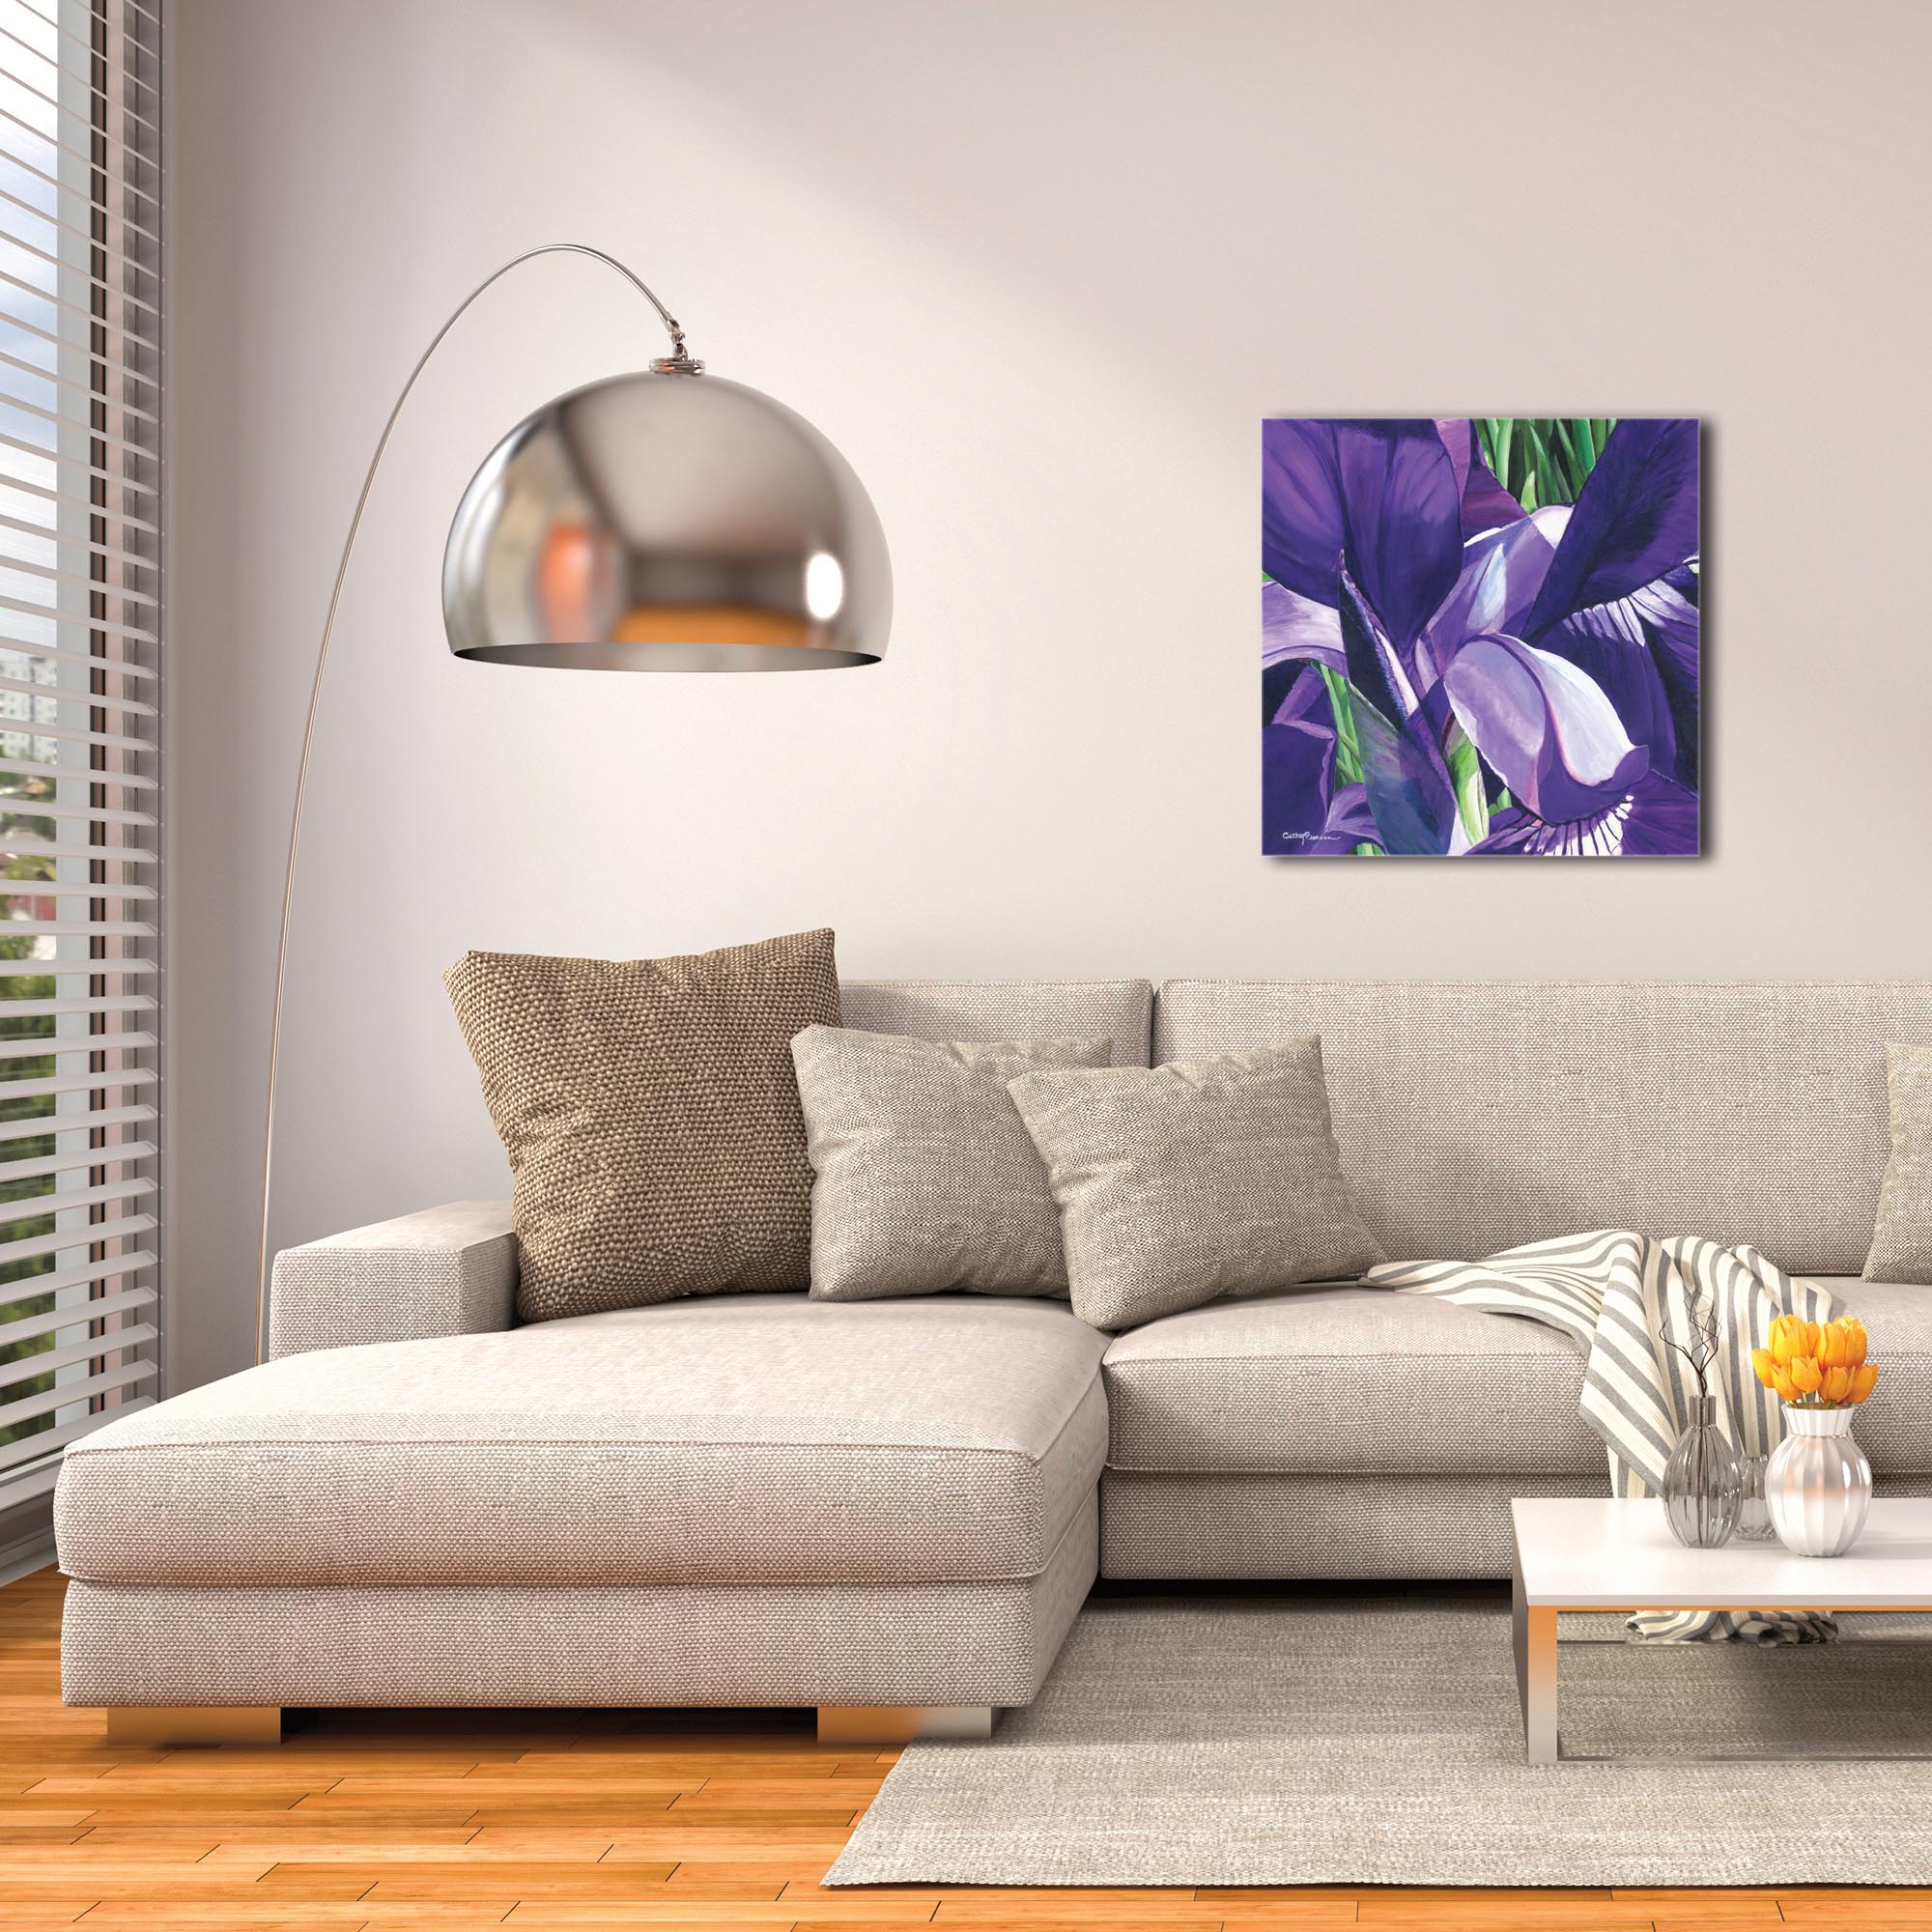 Traditional Wall Art 'Heart of a Purple Iris' - Floral Decor on Metal or Plexiglass - Image 3